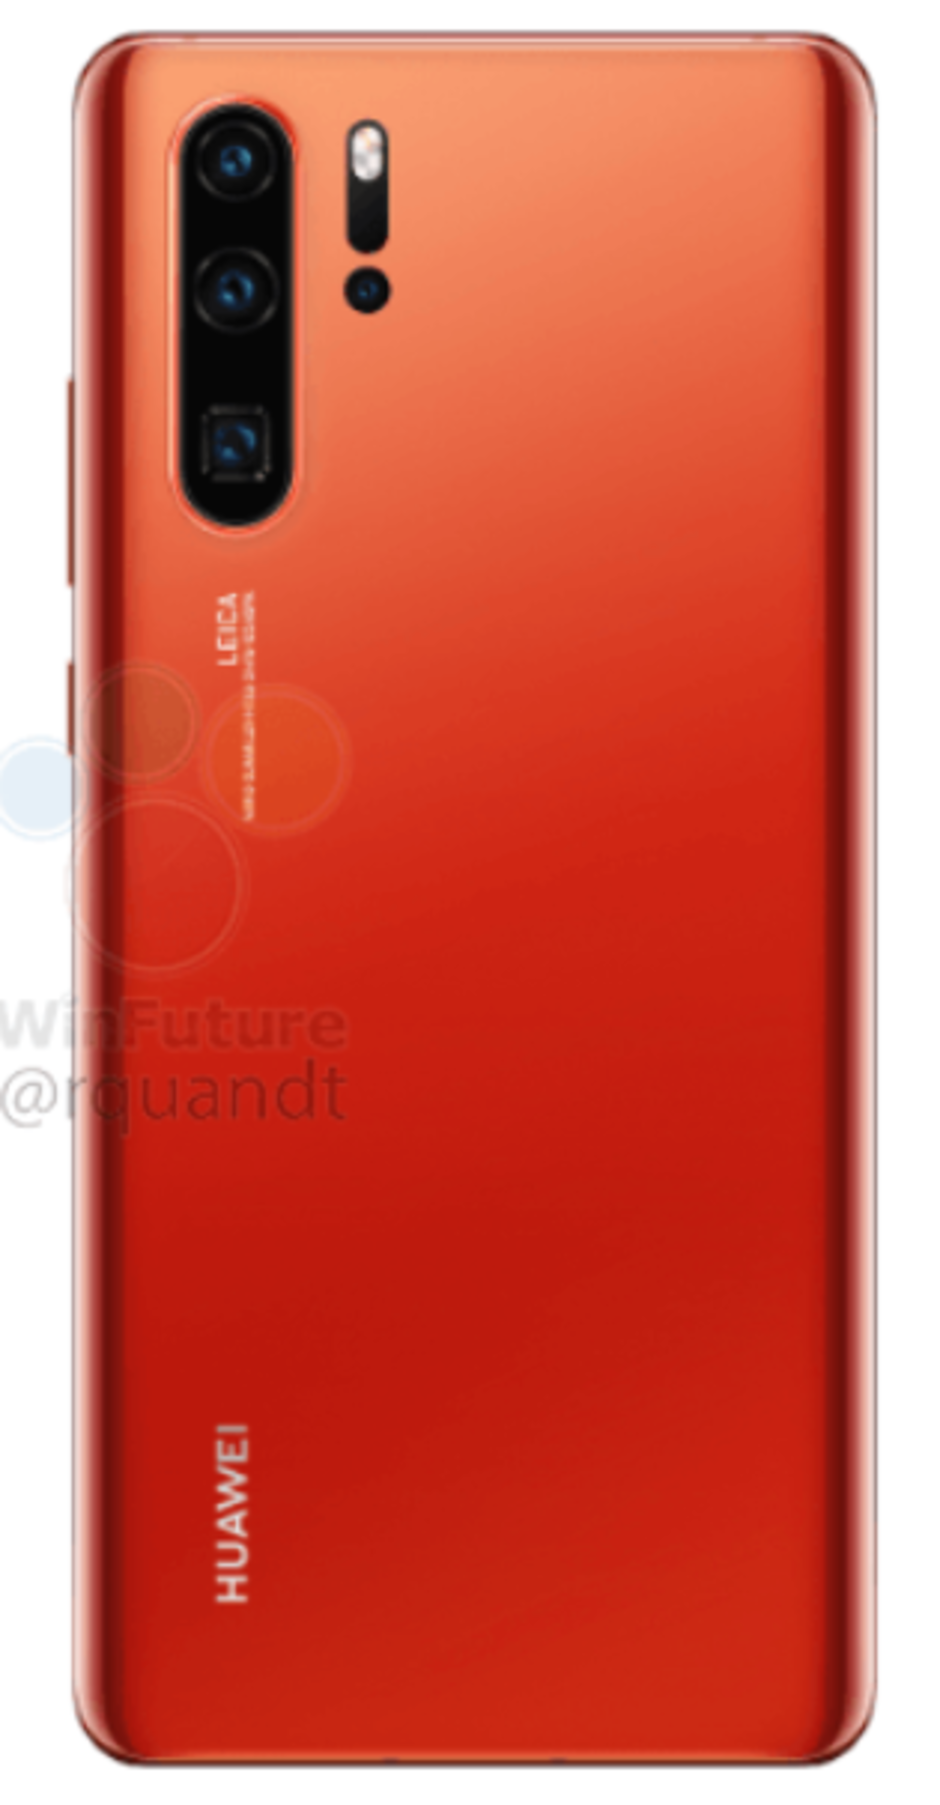 New Huawei P30 Pro renders reveal one nasty surprise (and a gorgeous new color)